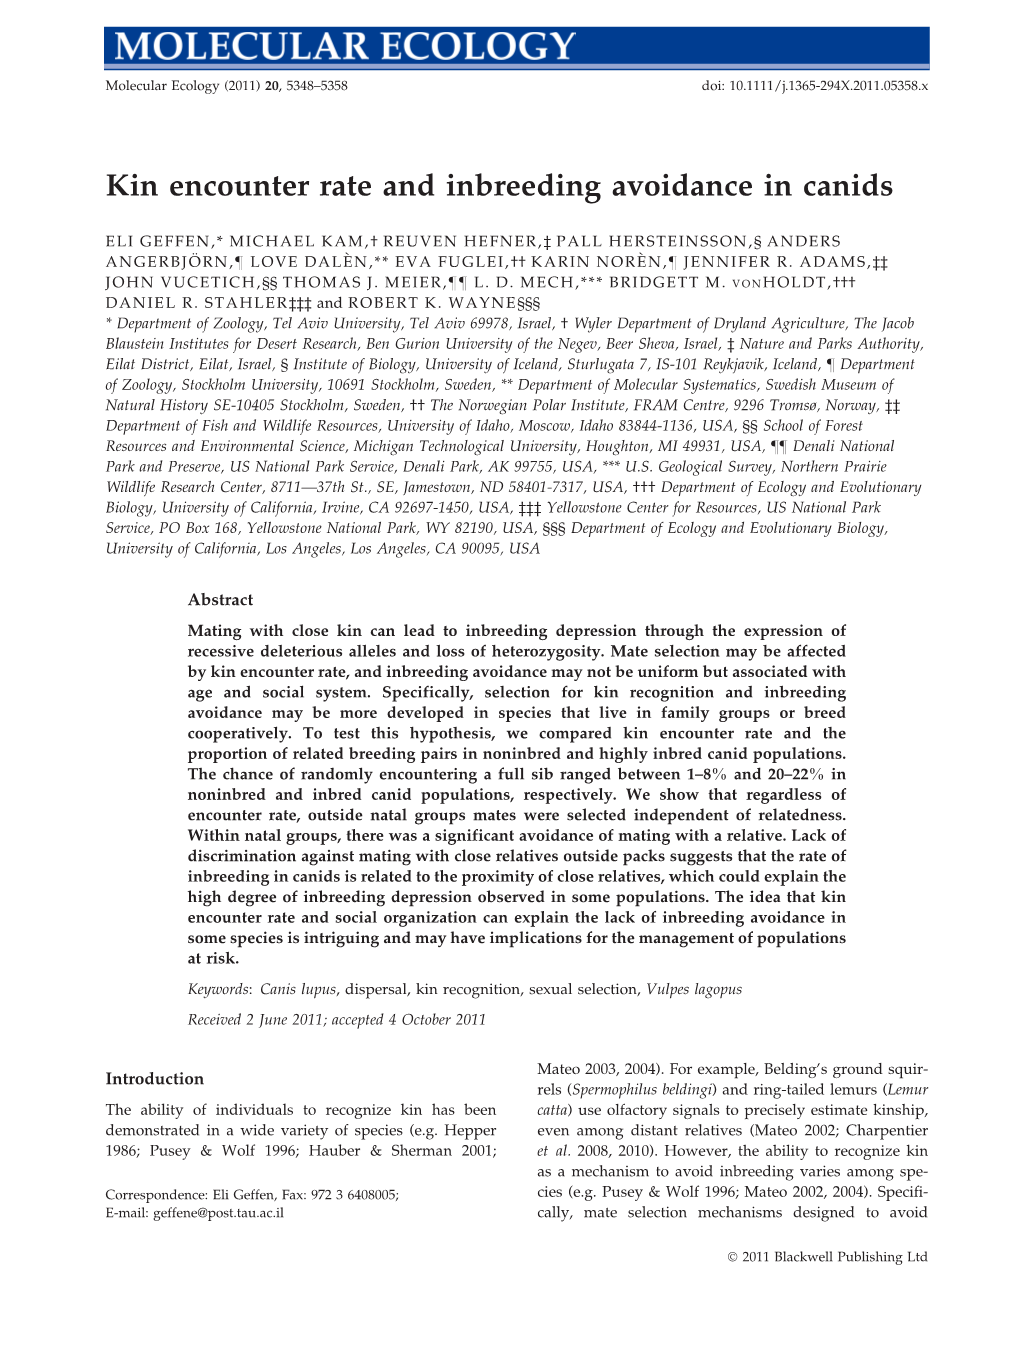 Kin Encounter Rate and Inbreeding Avoidance in Canids